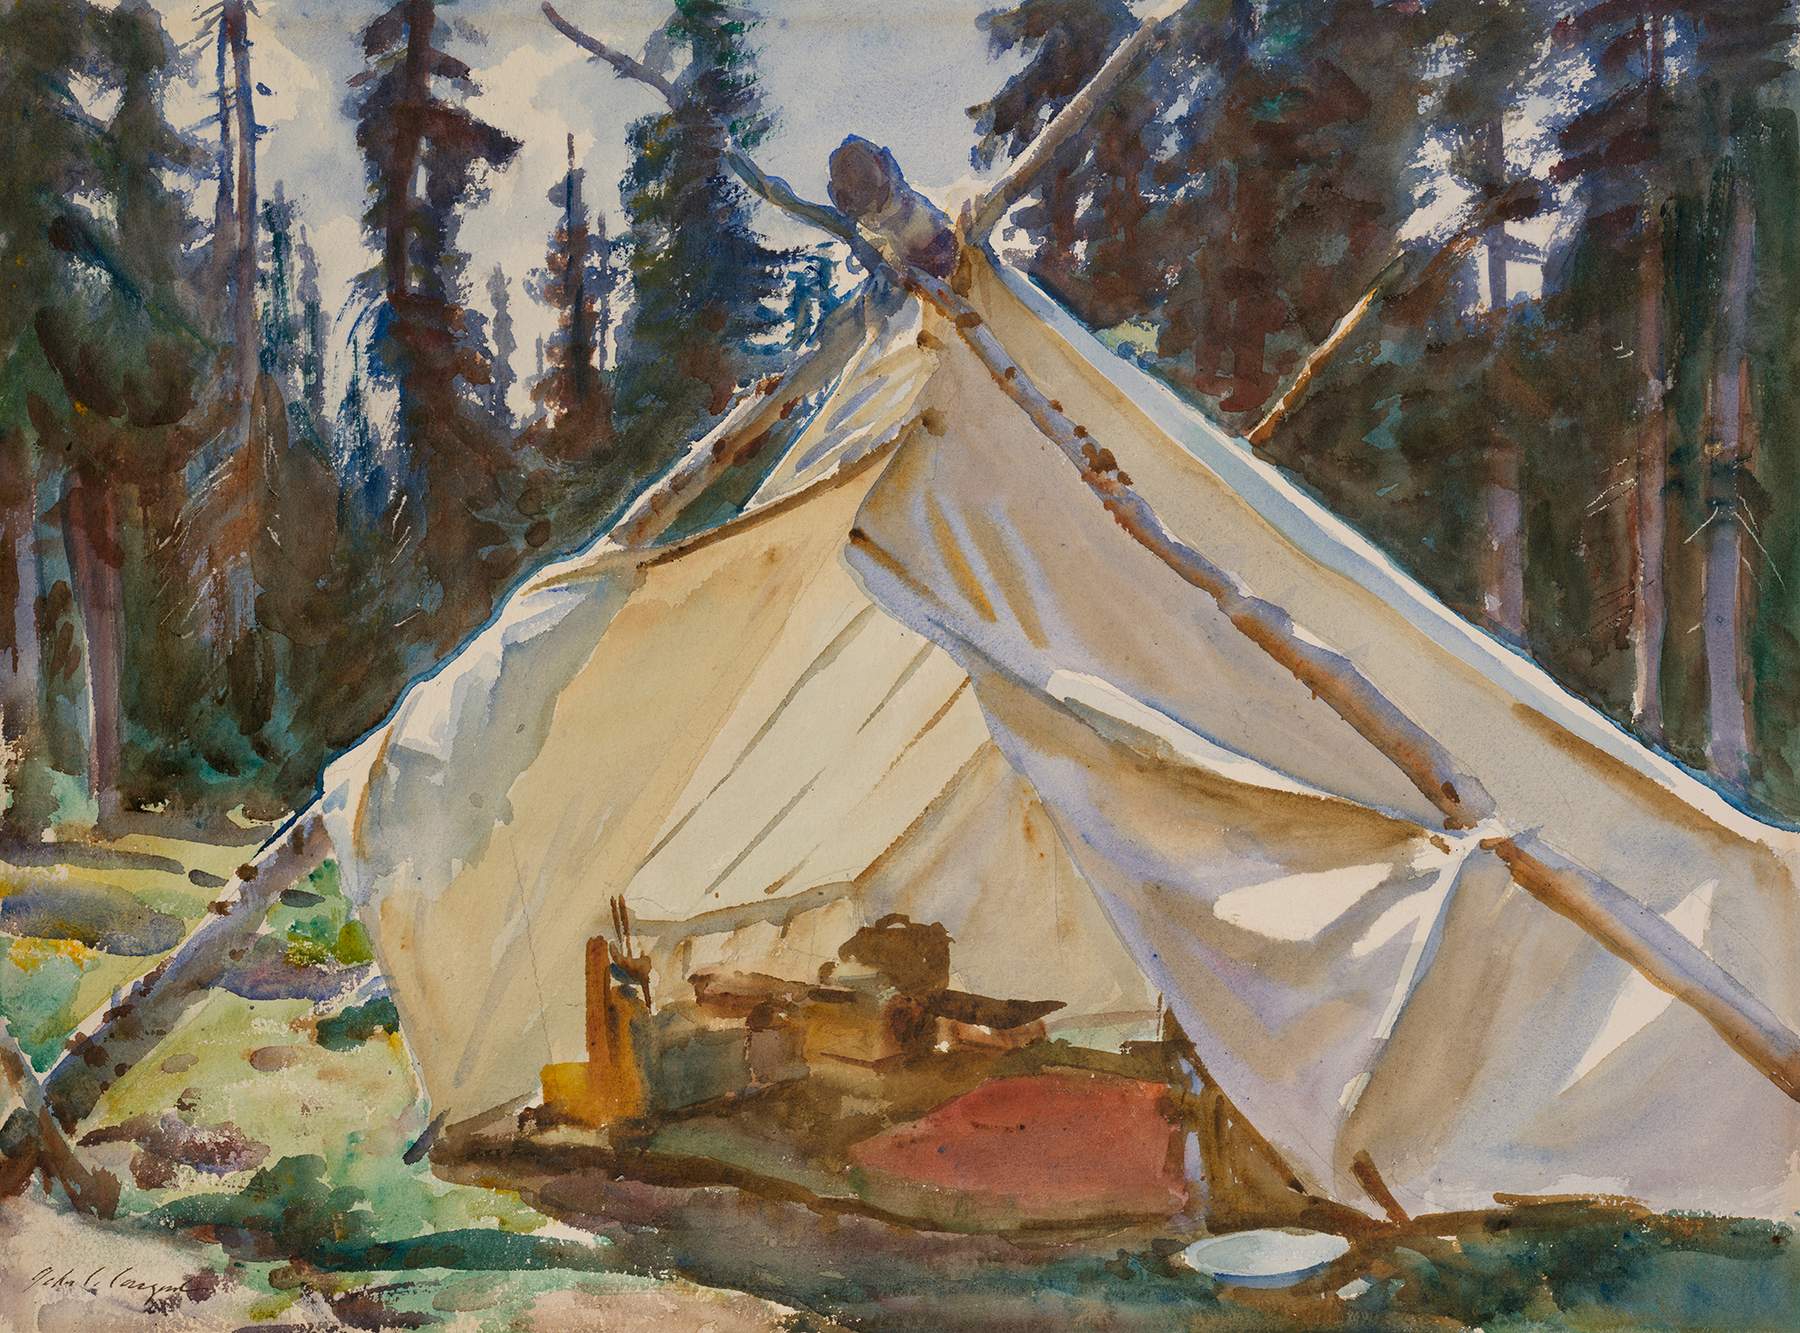 John Singer Sargent - A Tent in the Rockies